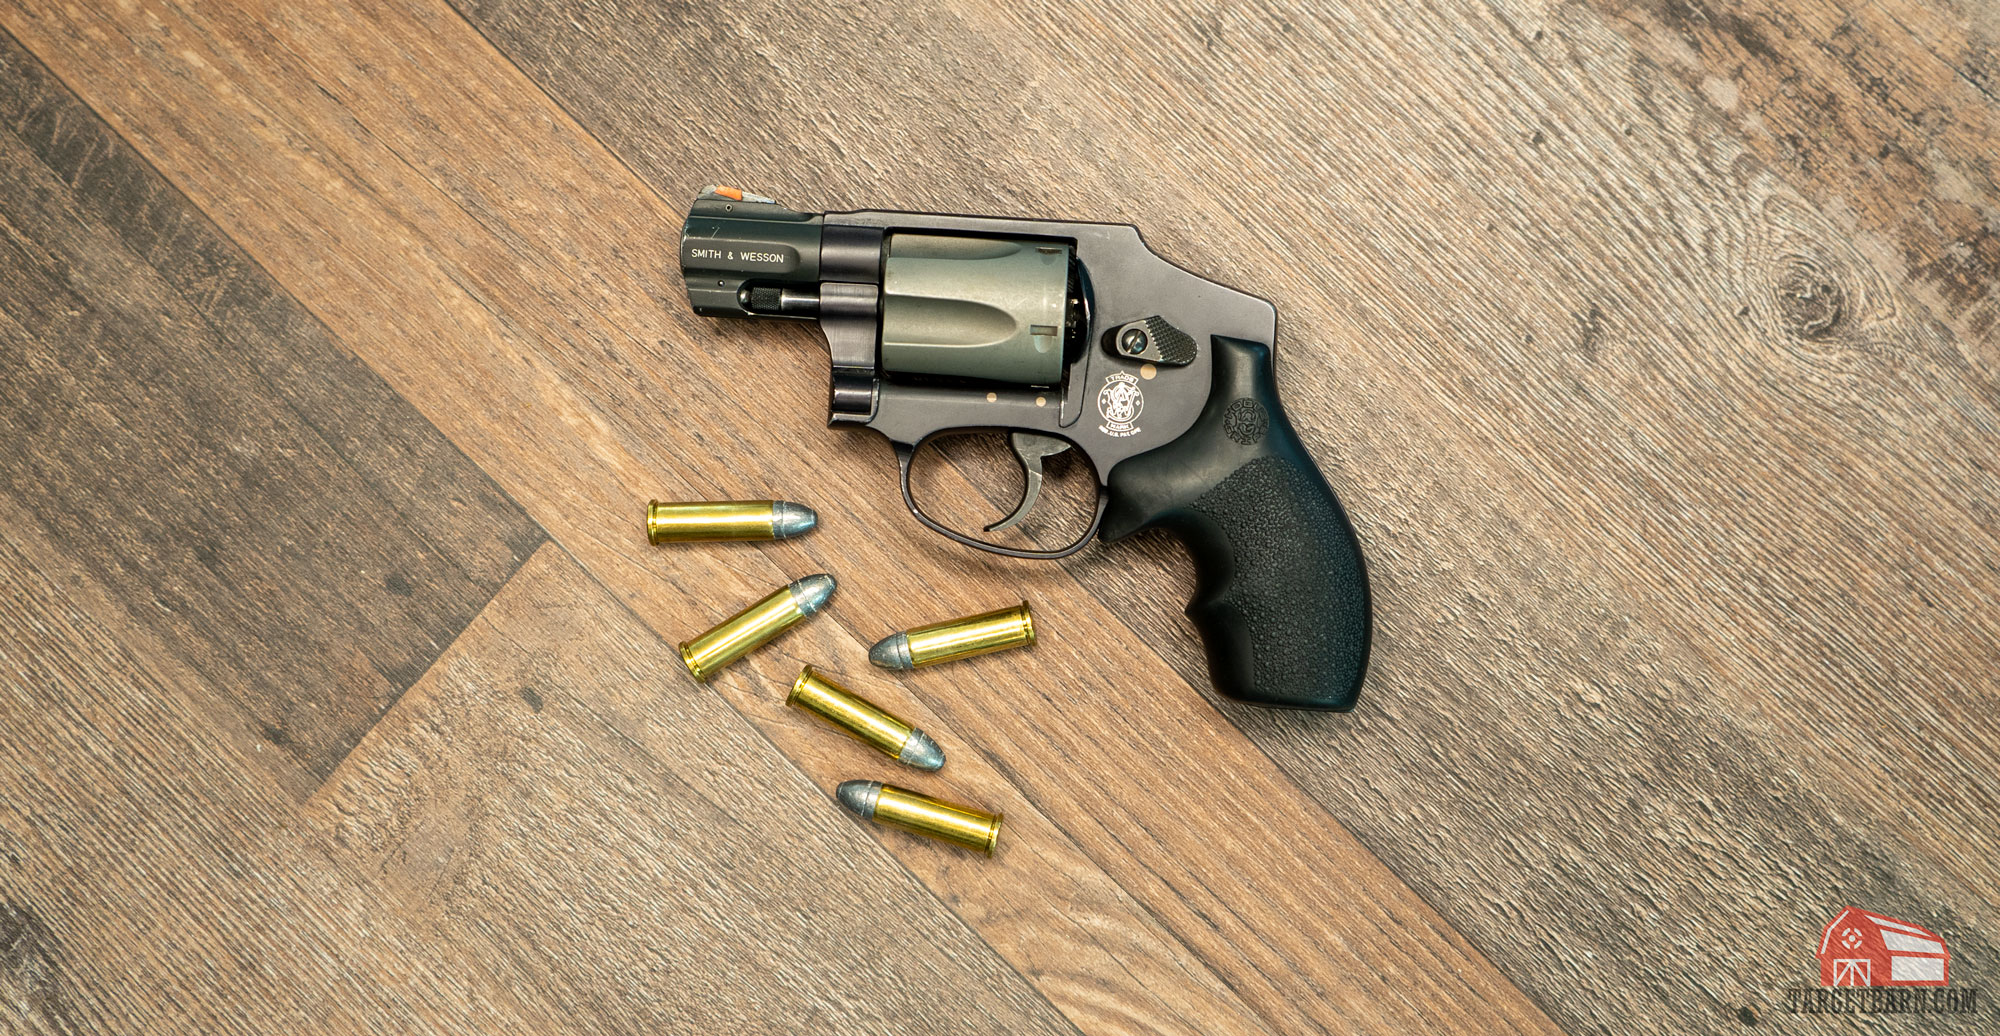 a smith & wesson snub nose revolver and 5 rounds of .38 special